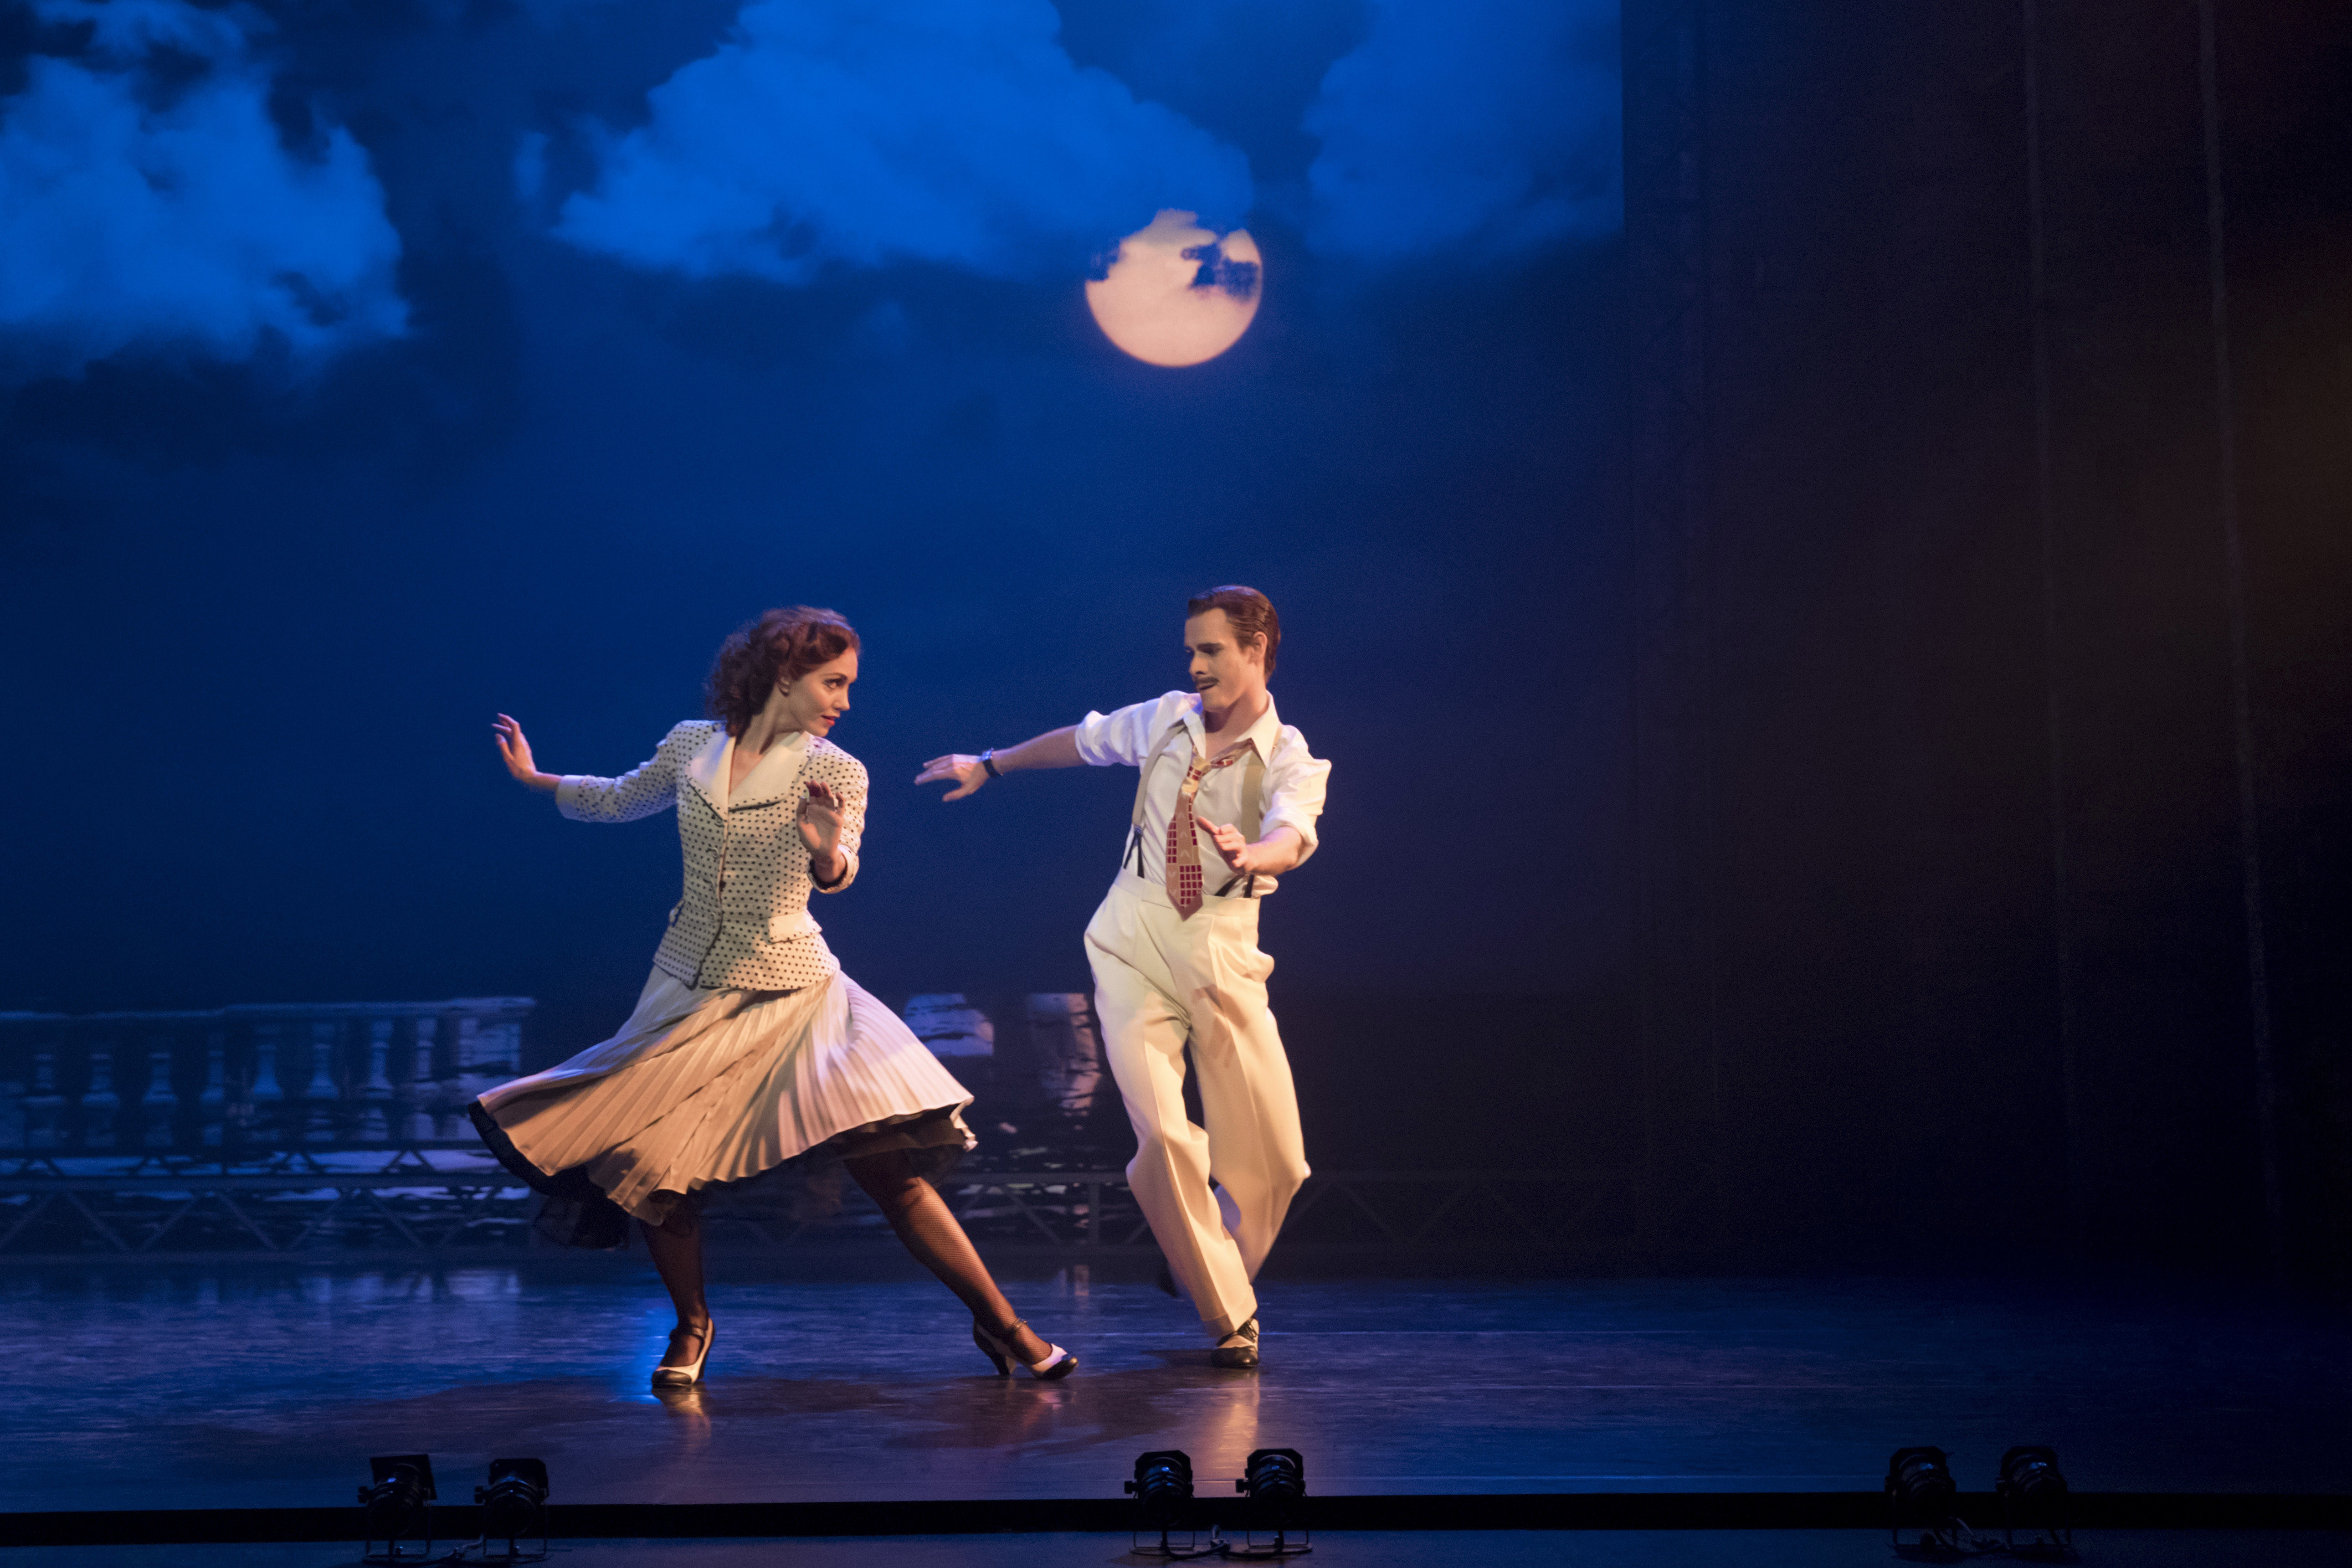 The Red Shoes' Takes the Stage - The New York Times